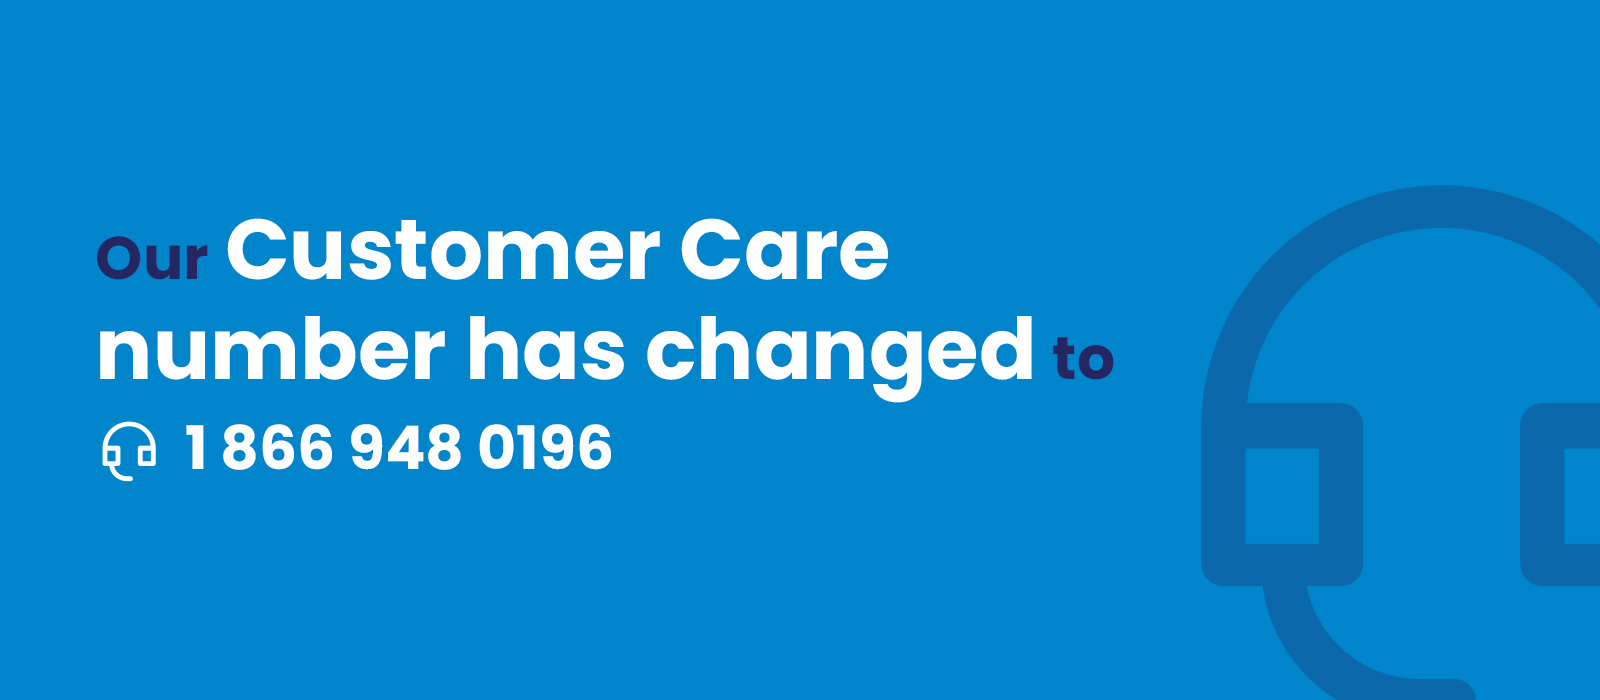 Our customer care number has changed